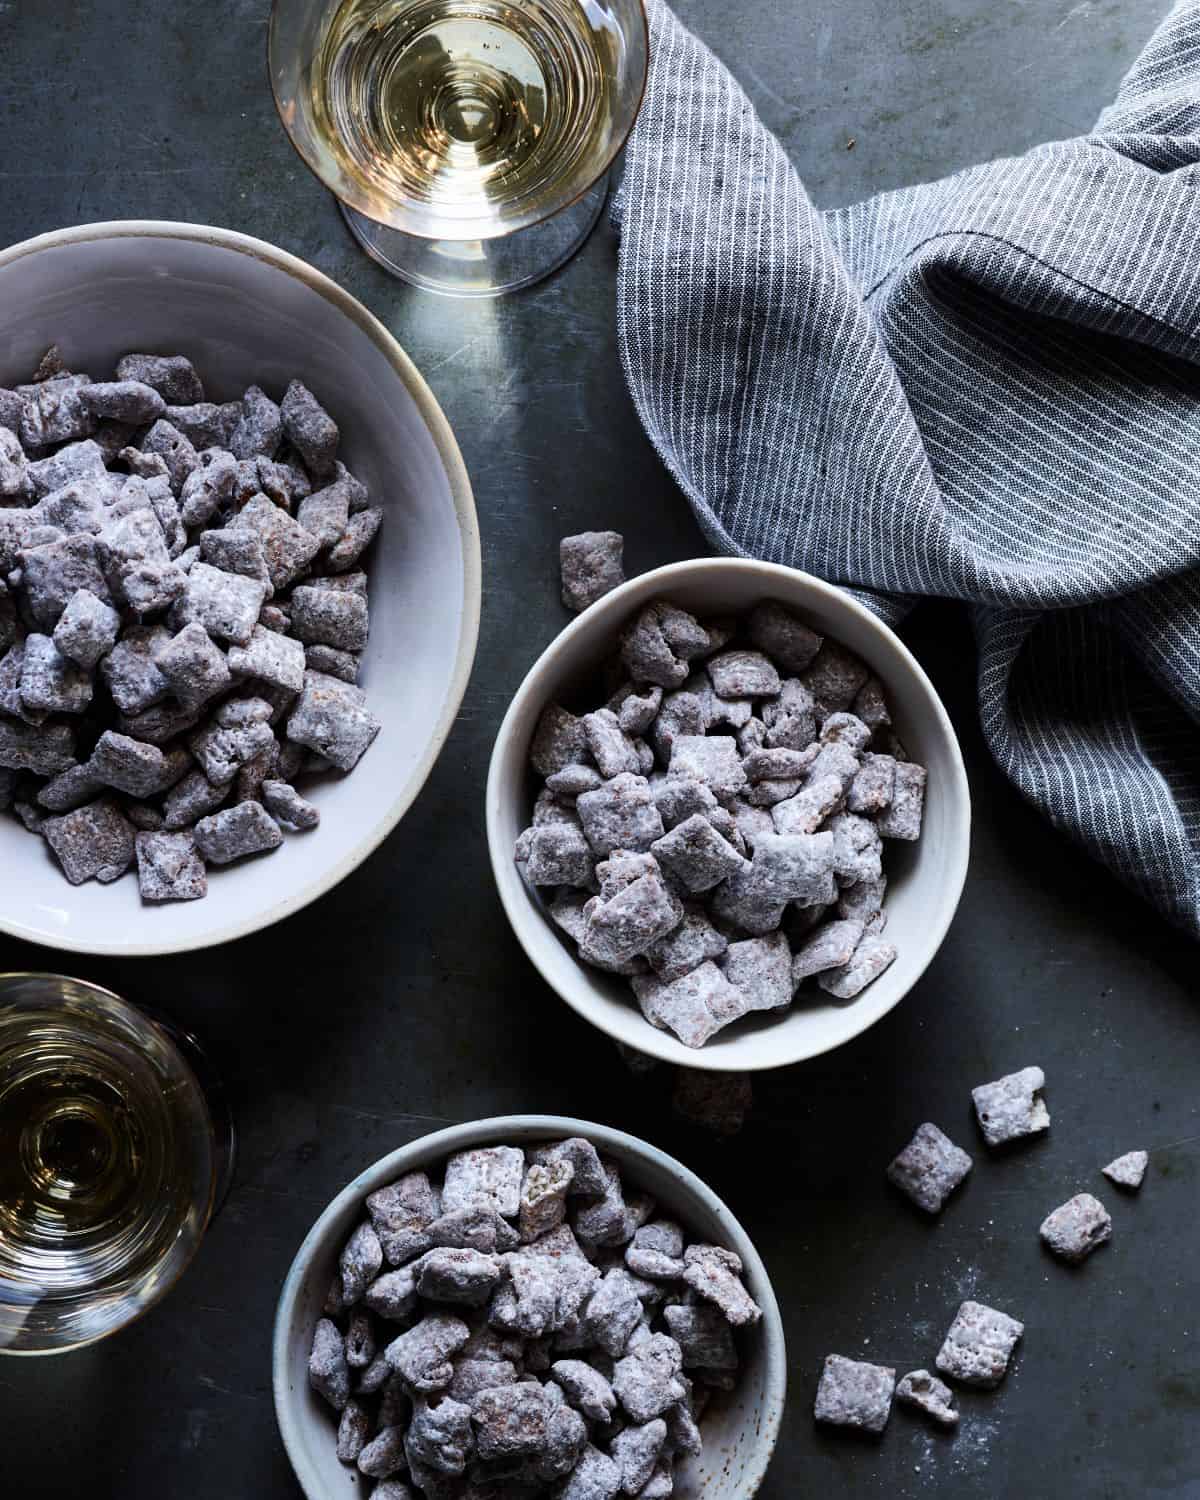 A big white ceramic bowl along with two smaller matching ceramic bowls filled with double dark chocolate muddy buddies, with two drinks and a striped grey-white kitchen towel.